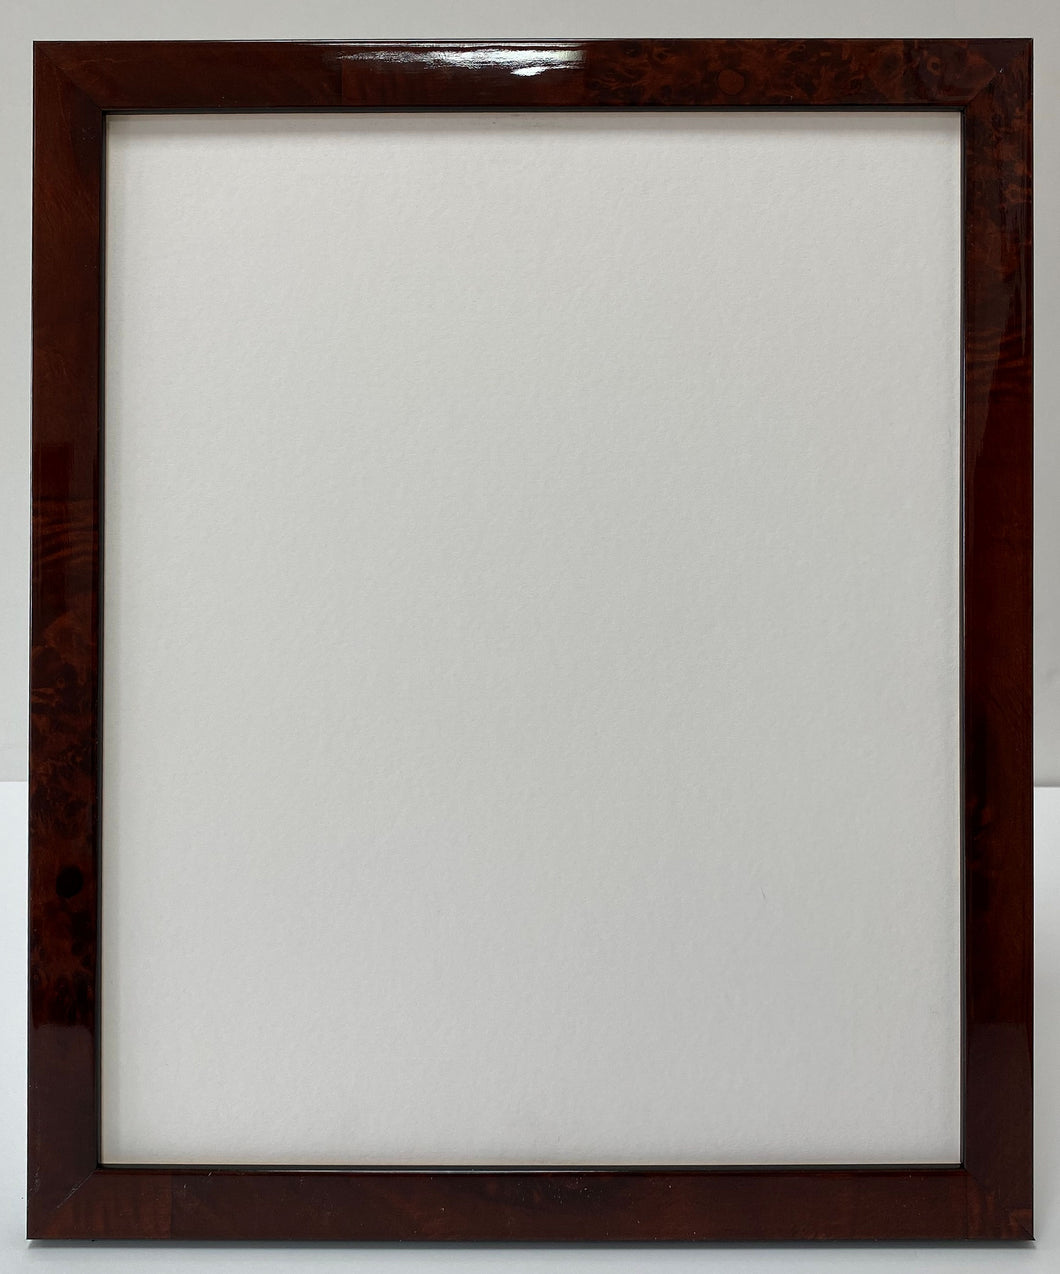 Teak Lacquer Veneer Wooden Picture Frame (20mm wide)